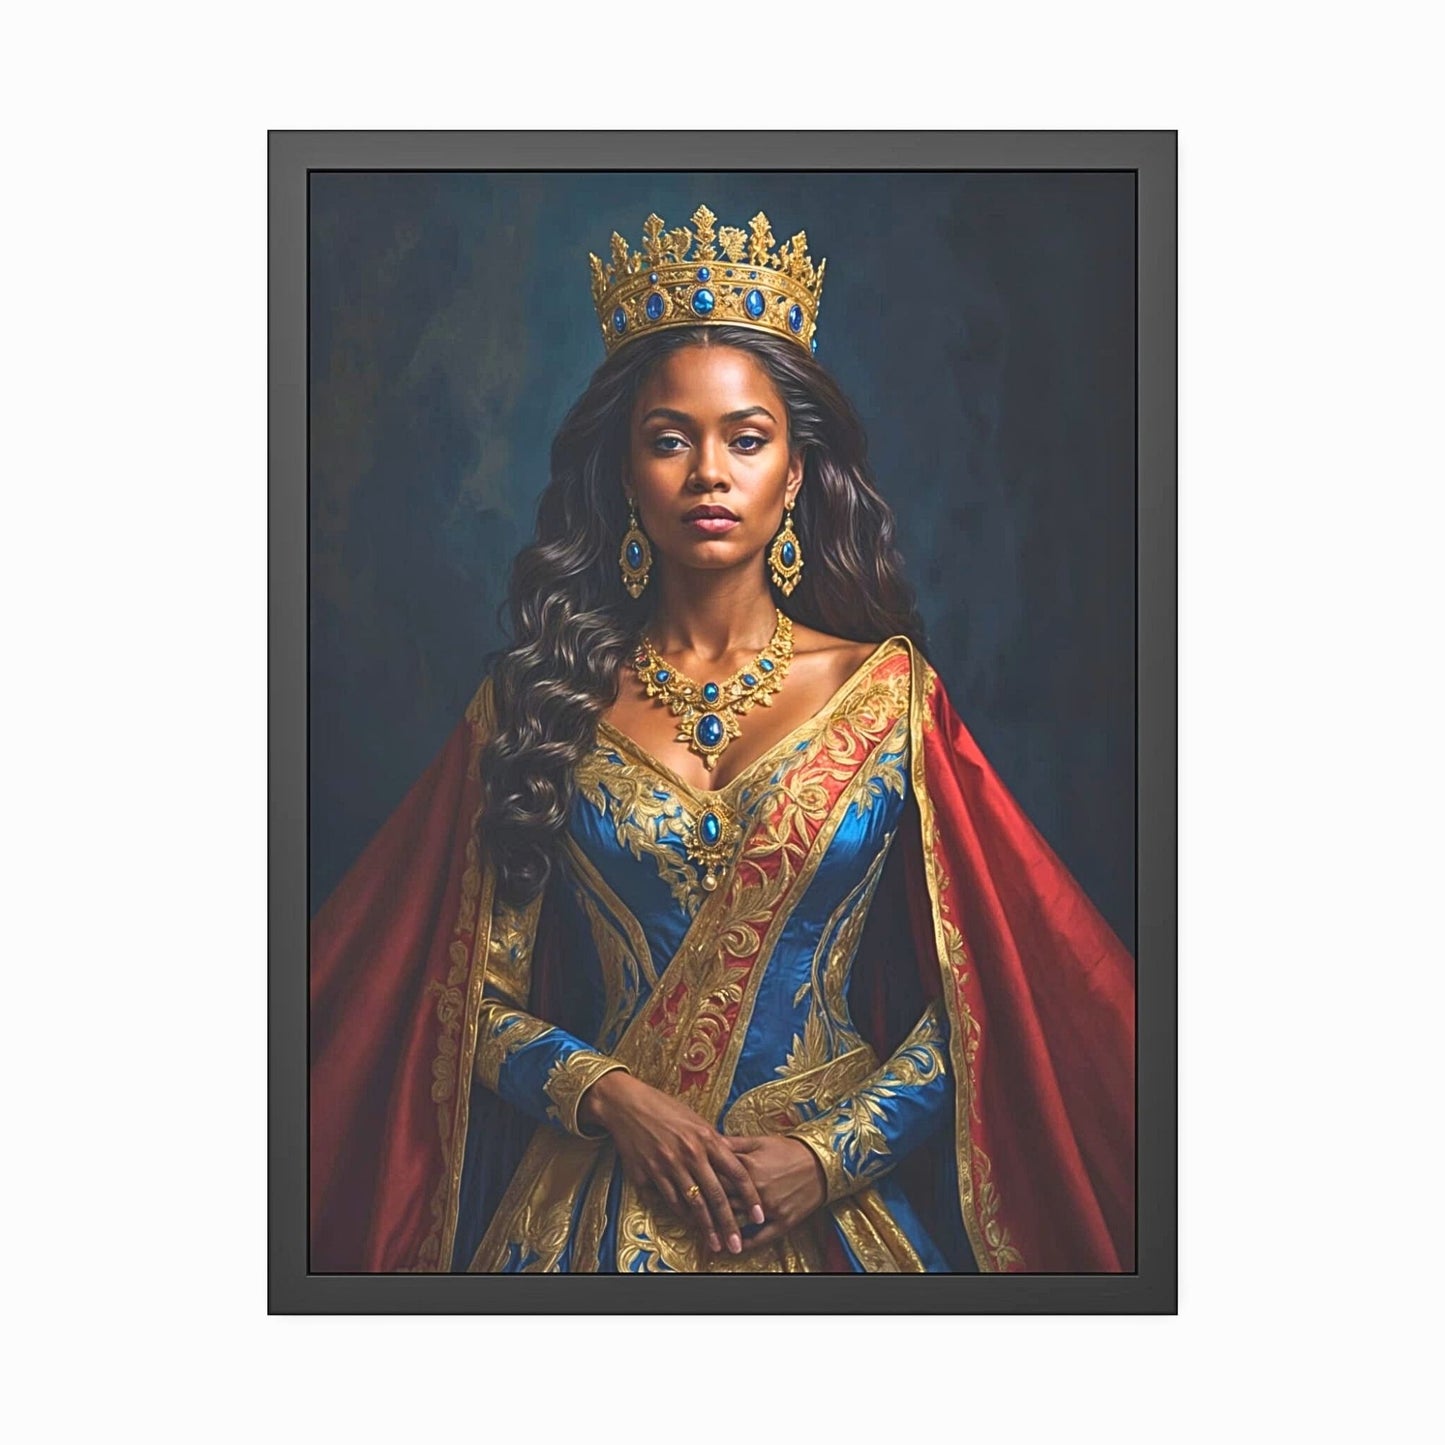 Celebrate her with a one-of-a-kind Renaissance portrait, meticulously crafted from her photograph. This custom artwork transforms her into a timeless queen, making it an unforgettable gift for birthdays or special occasions. Ideal for those who appreciate artistry and seek a meaningful, personalized gesture that captures her unique essence with grace and elegance.